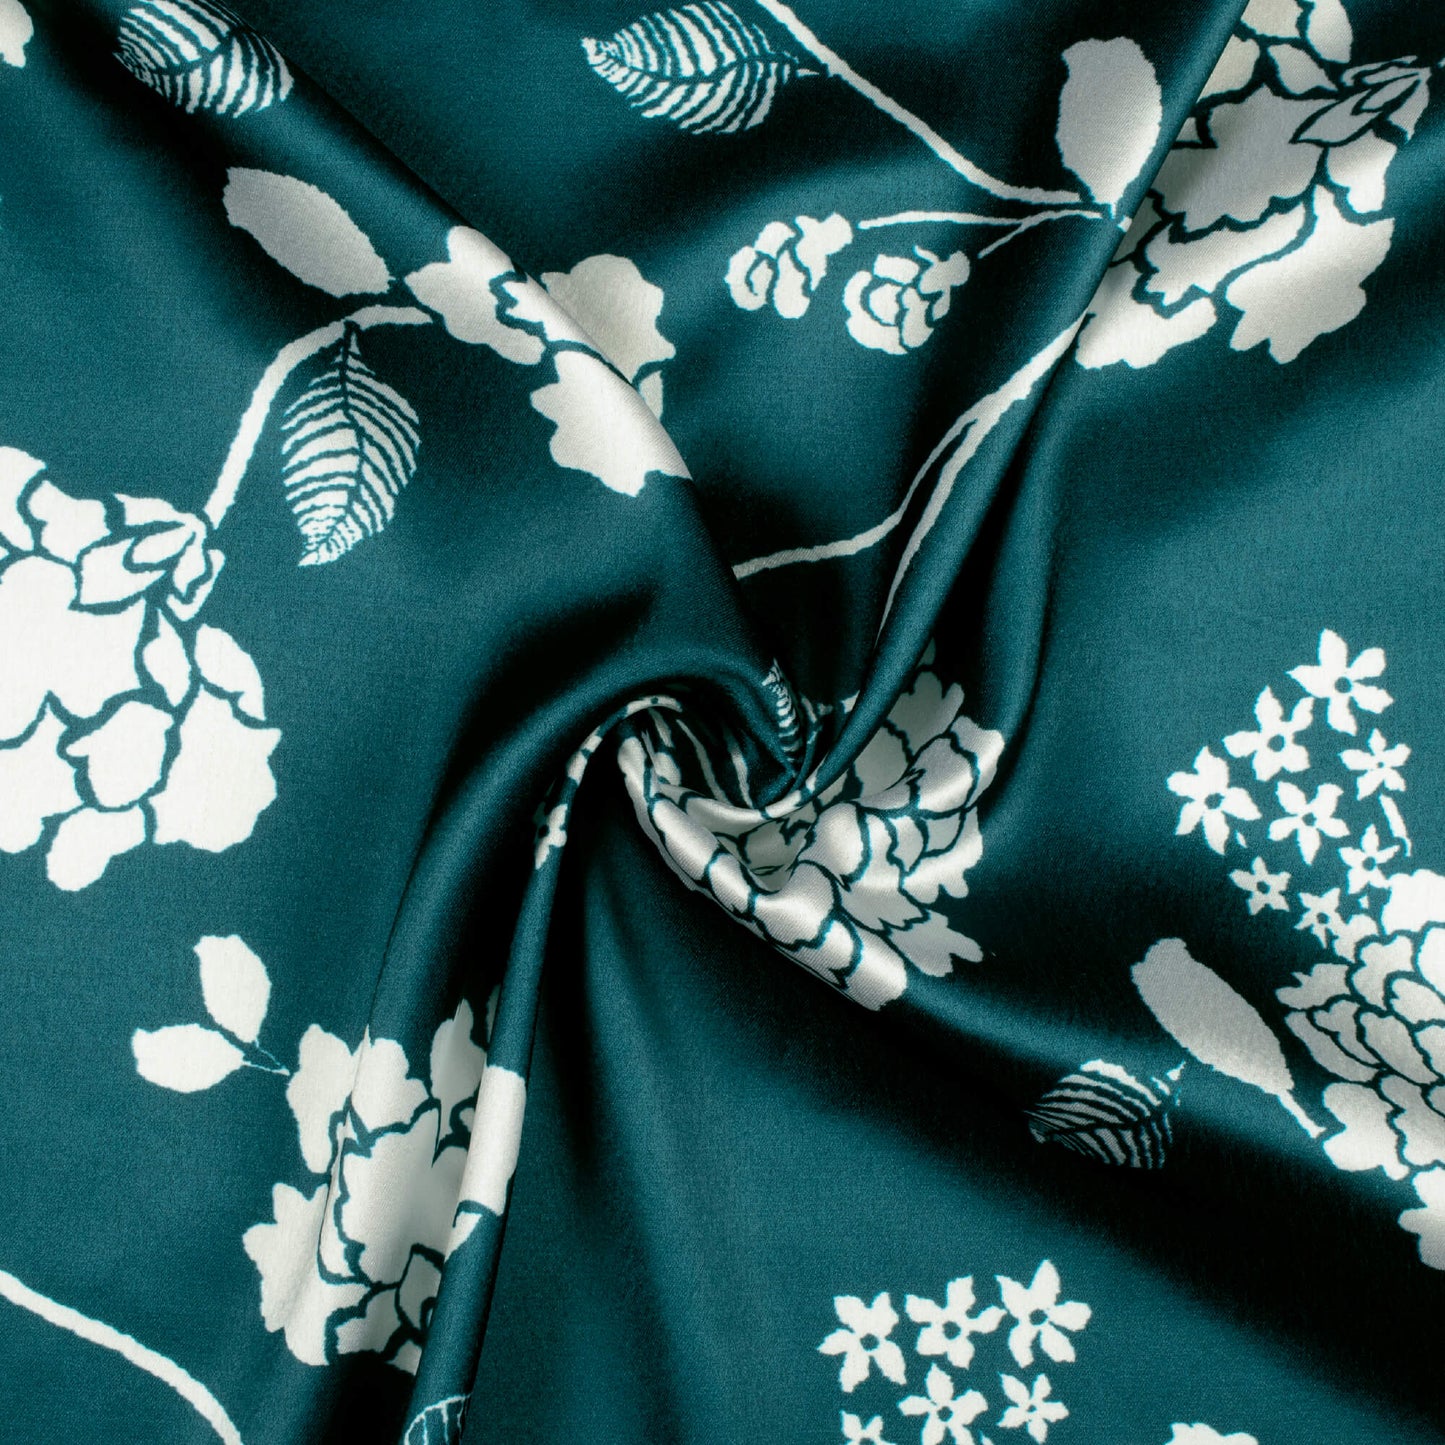 Peacock Blue And White Floral Pattern Digital Print Japan Satin Fabric